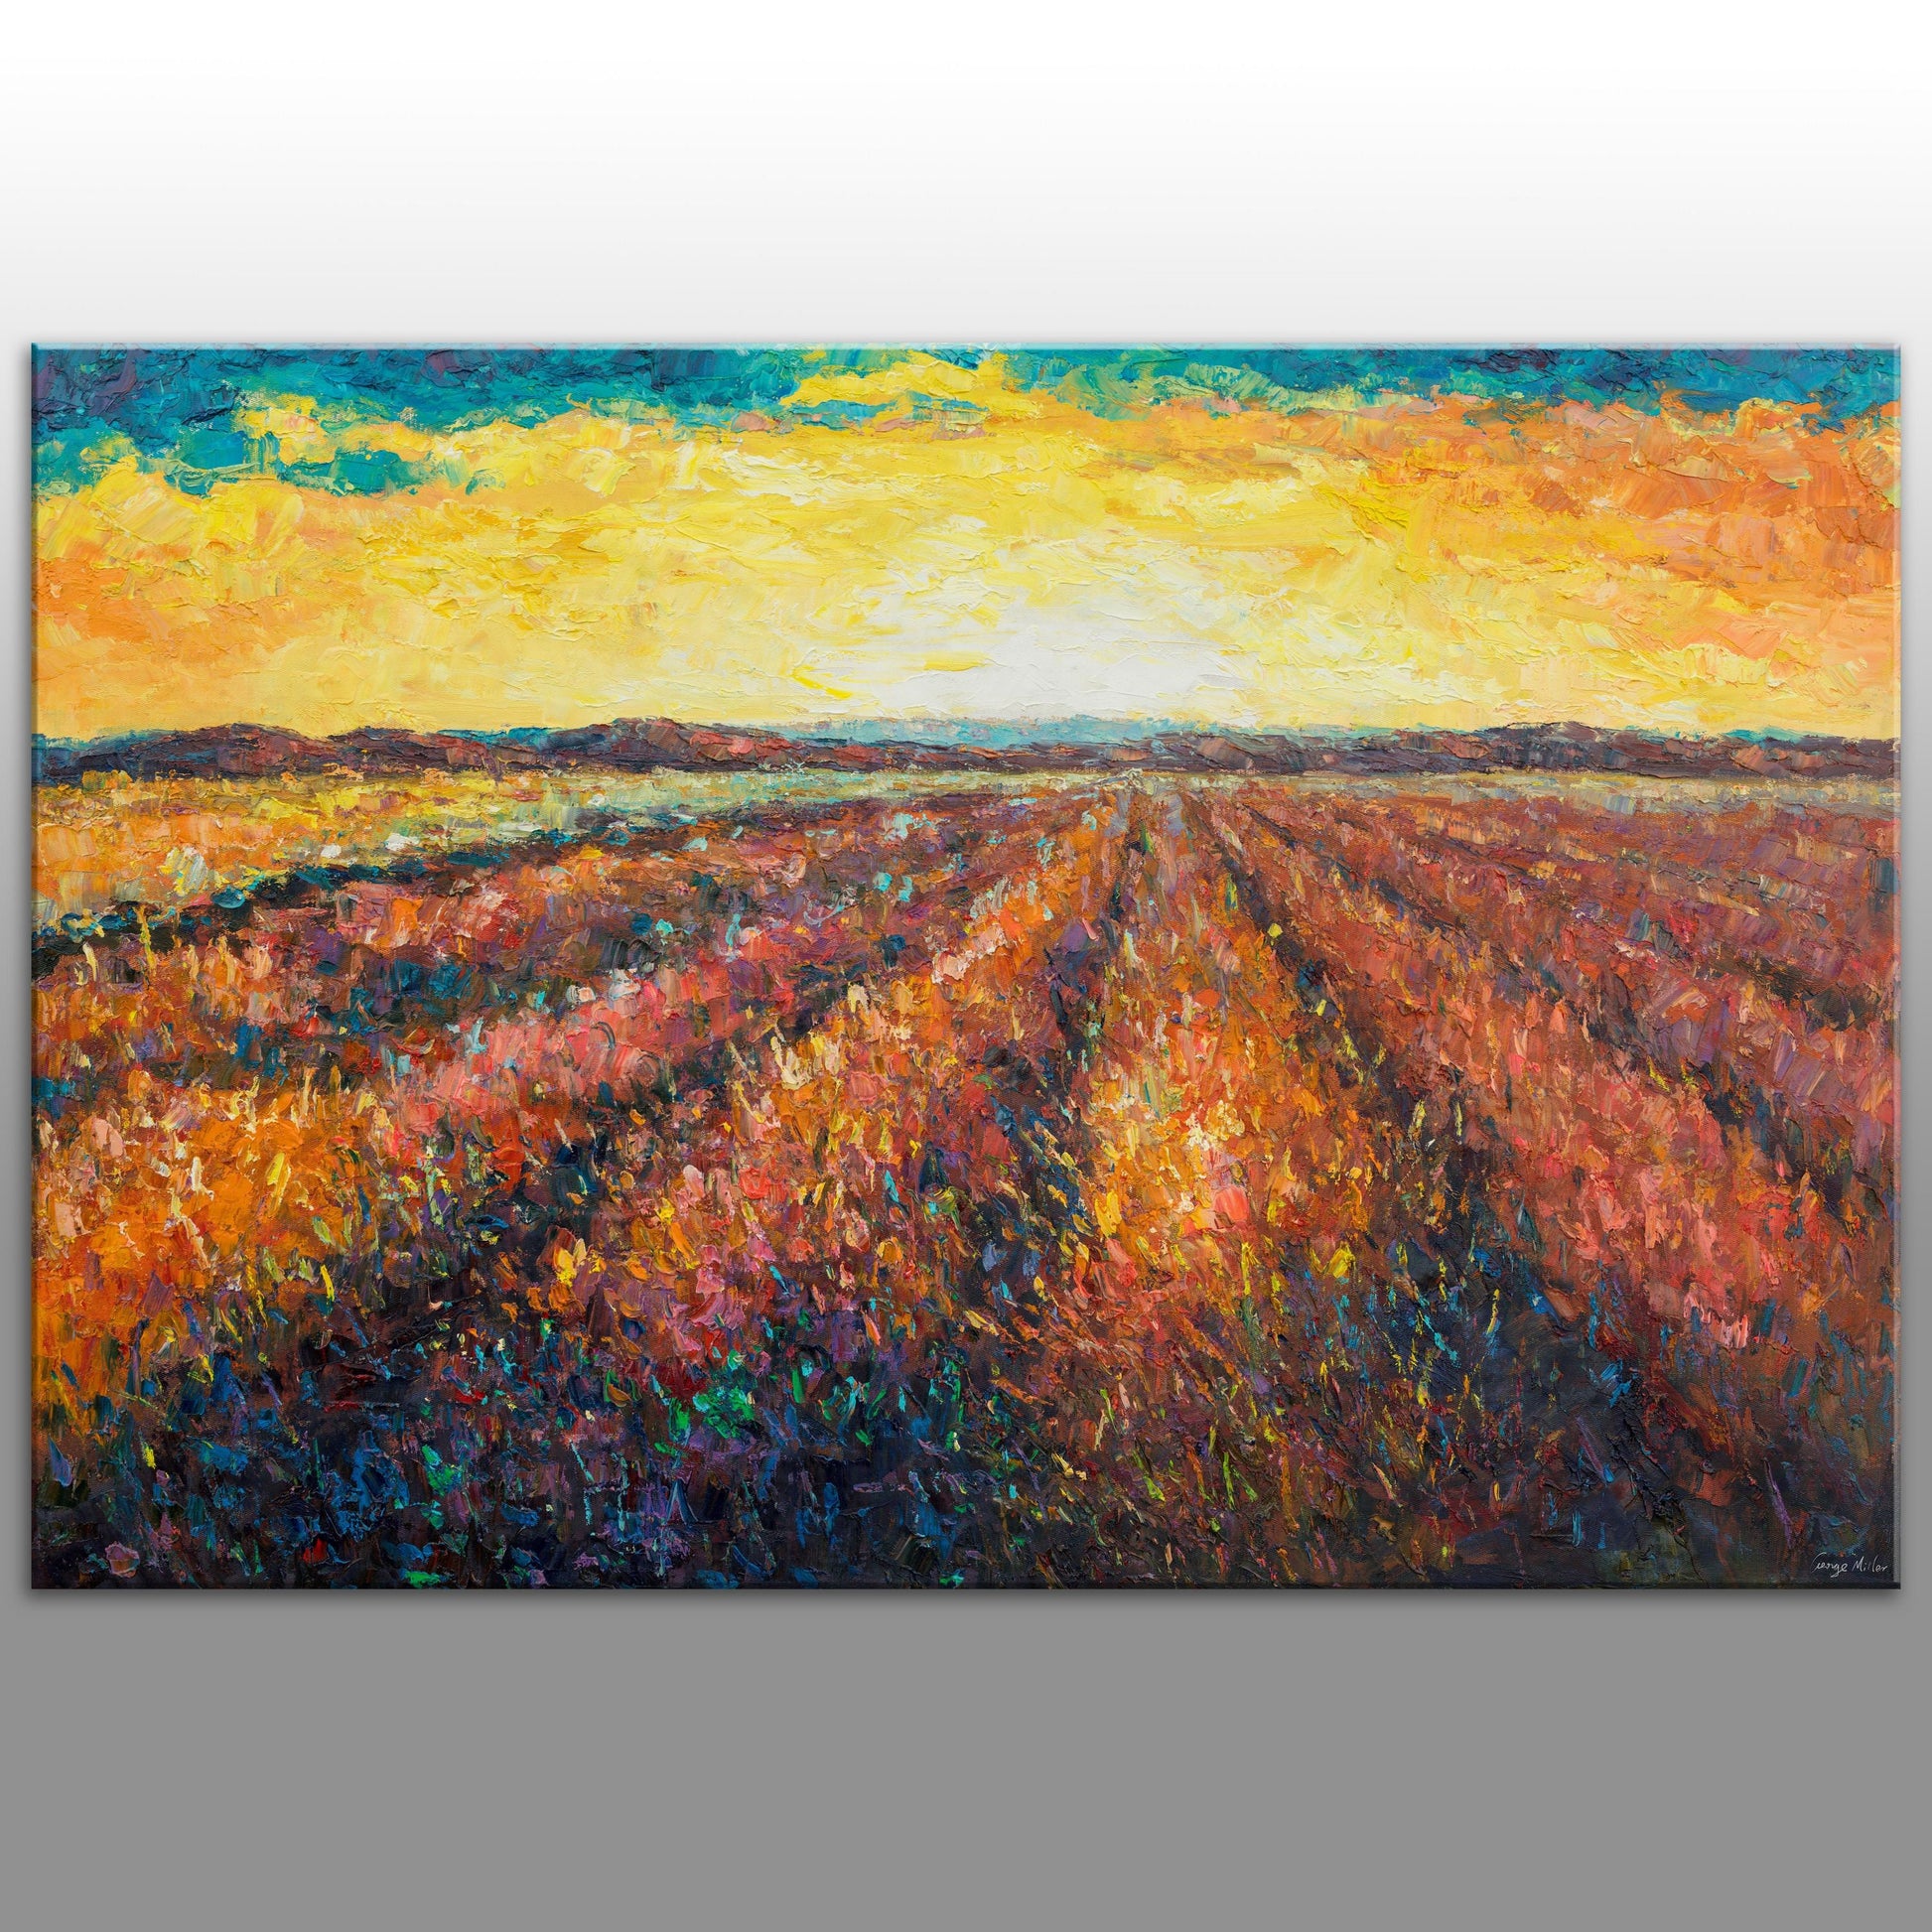 Landscape Oil Painting, Large Wall Art Painting, Lavender Field, Abstract Art, Original Artwork, Canvas Art, Wall Decor, Large Canvas Art